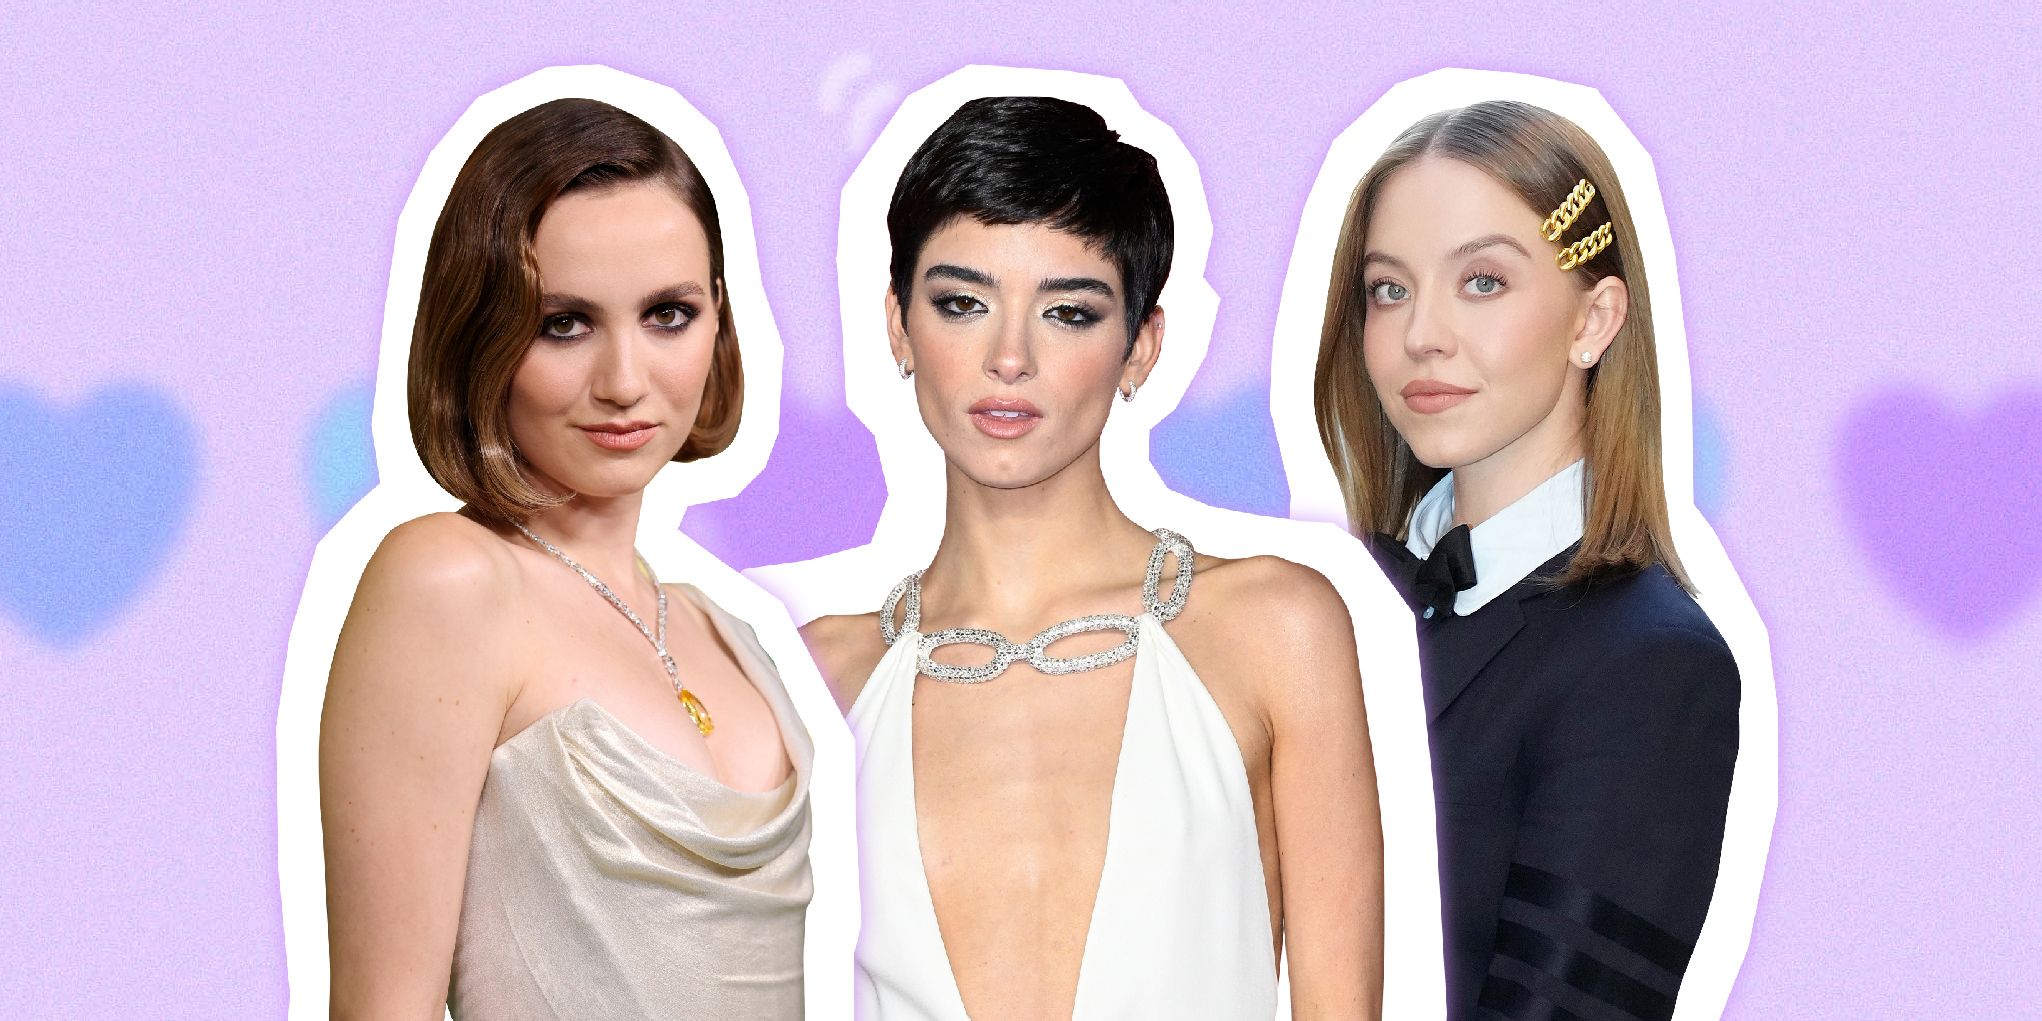 The Cutest Prom Hairstyles for Short, Medium, and Long Hair